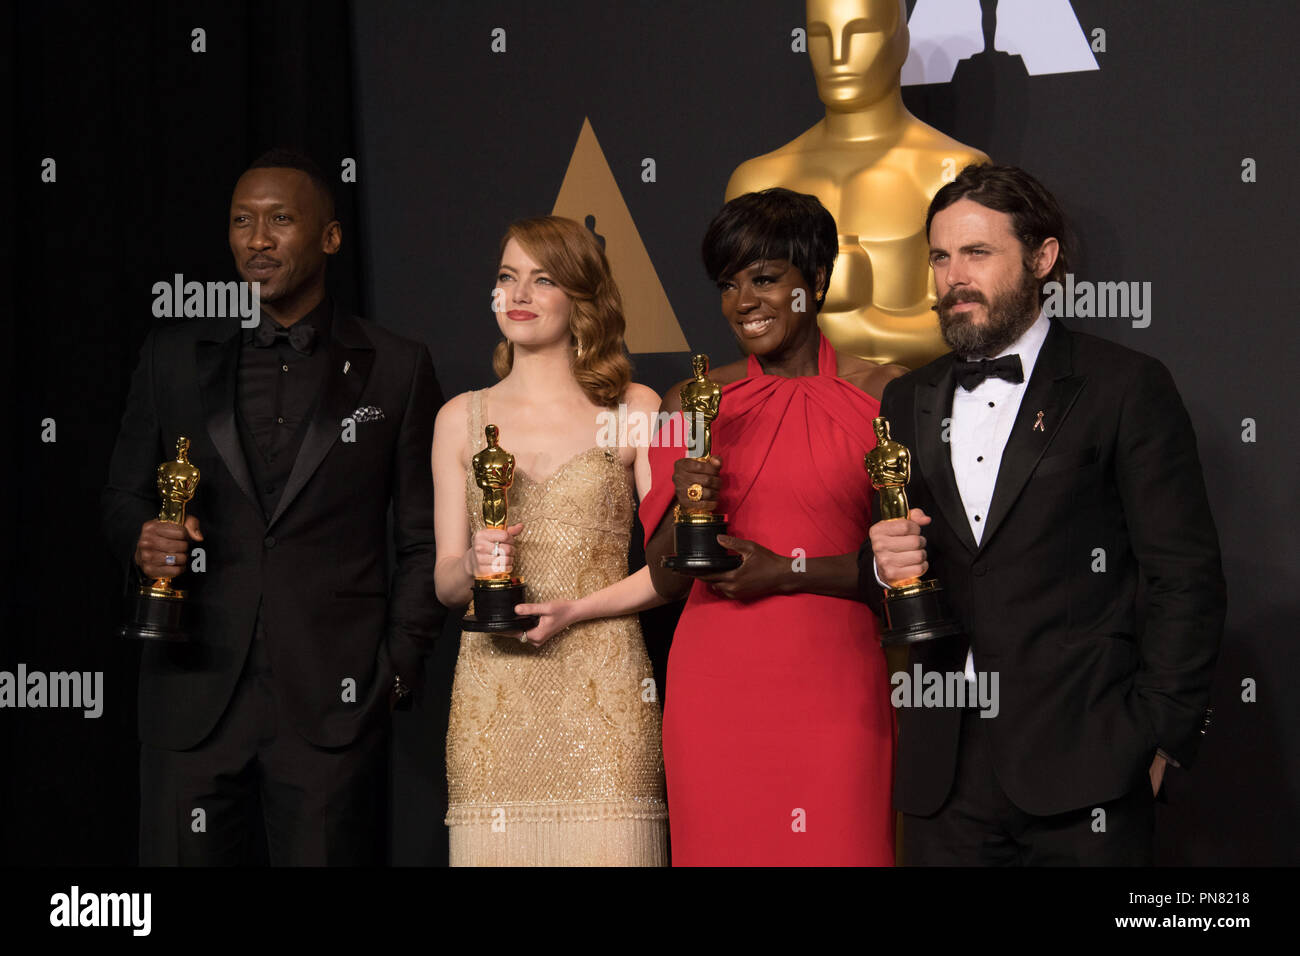 Backstage posing with their Oscars®, Mahershala Ali, Actor in a Supporting Role; Emma Stone, Actress in a Leading Role; Viola Davis, Actress in a Supporting Role; and Casey Affleck, Actor in a Leading Role backstage during The 89th Oscars® at the Dolby® Theatre in Hollywood, CA on Sunday, February 26, 2017.  File Reference # 33242 551THA  For Editorial Use Only -  All Rights Reserved Stock Photo